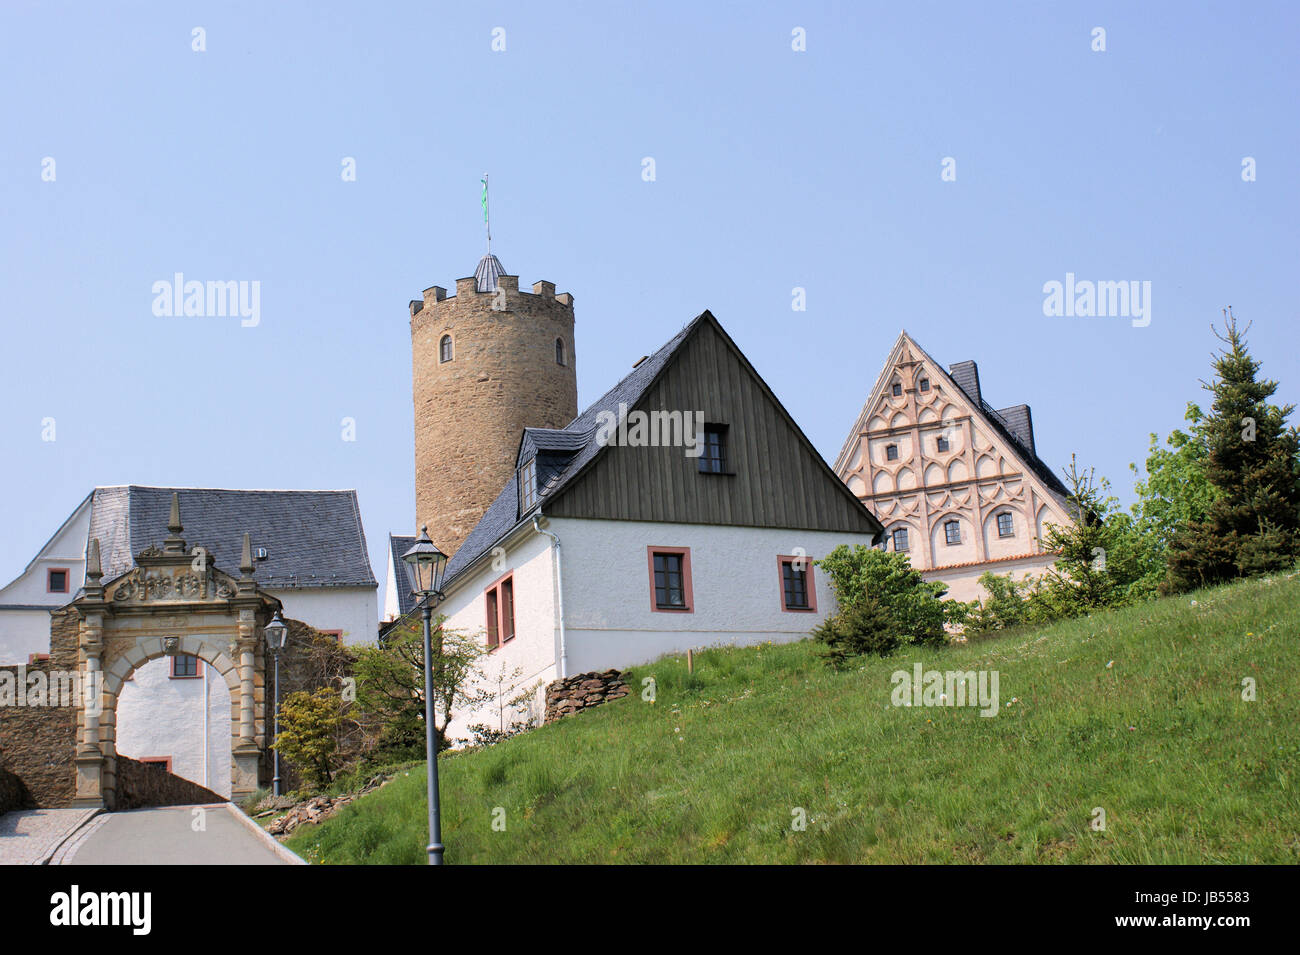 an ancient castle in saxony Stock Photo